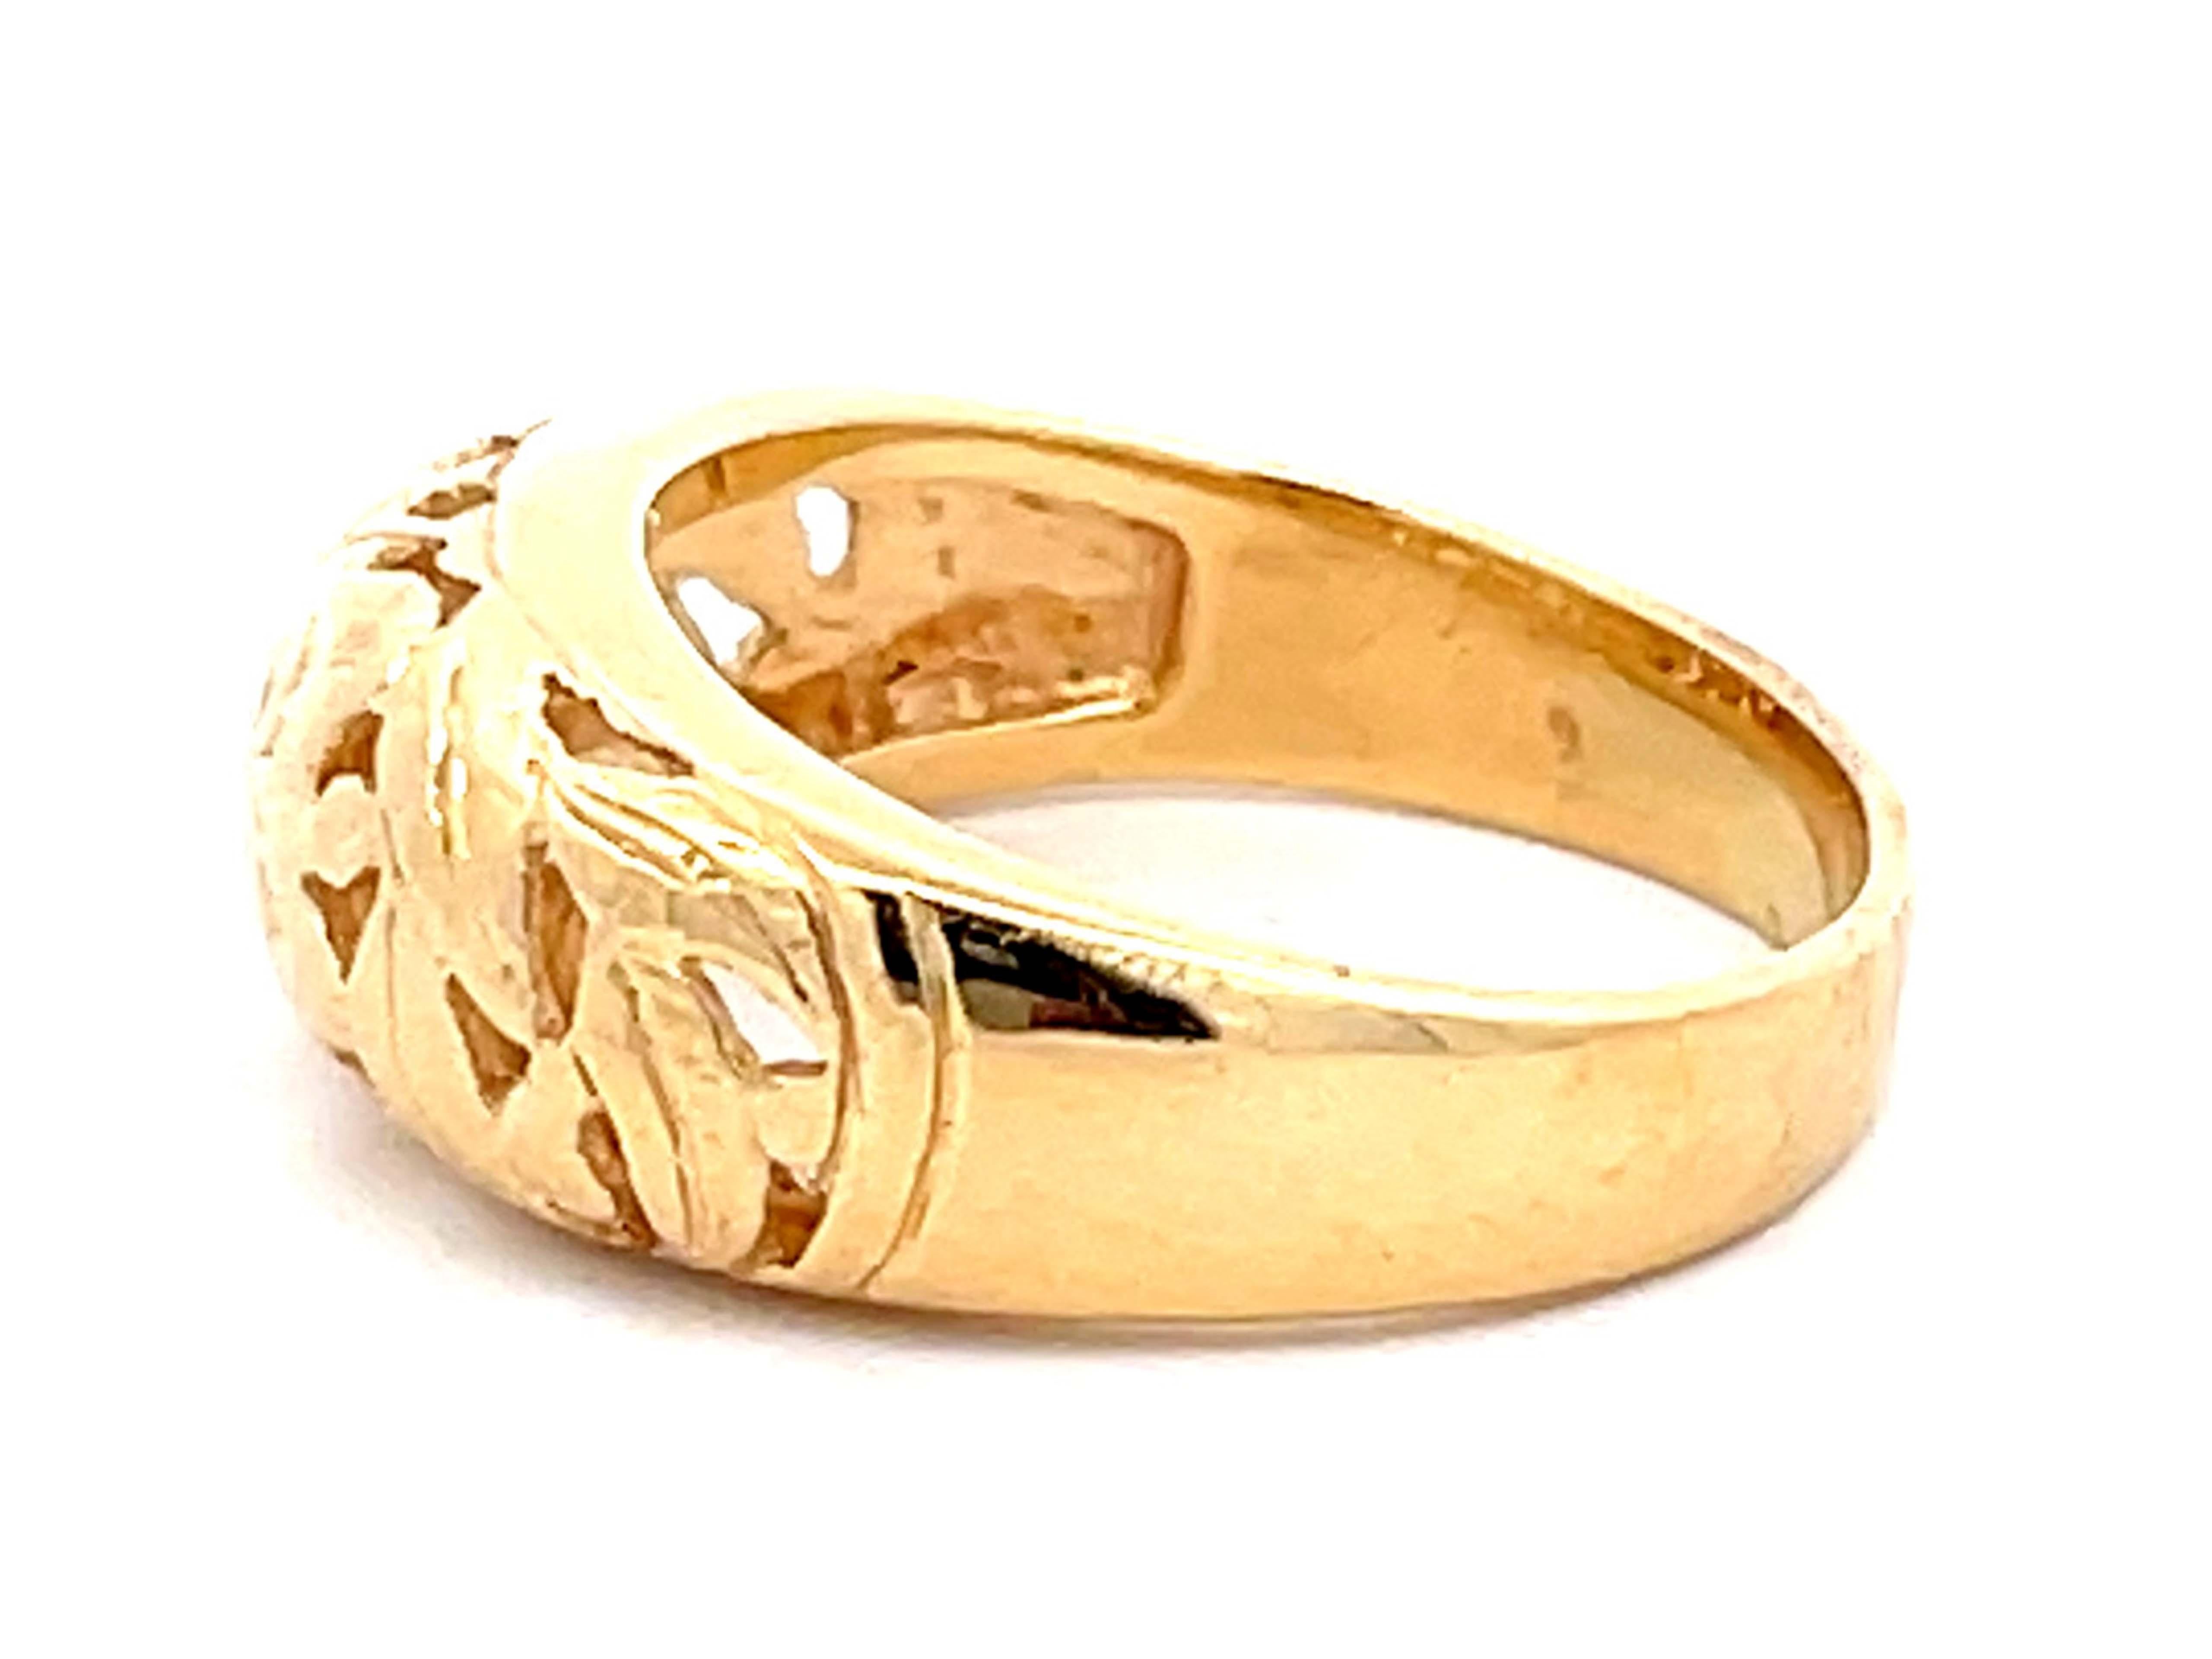 Mings Chrysanthemum Cutout Band Ring in 14k Yellow Gold In Excellent Condition For Sale In Honolulu, HI